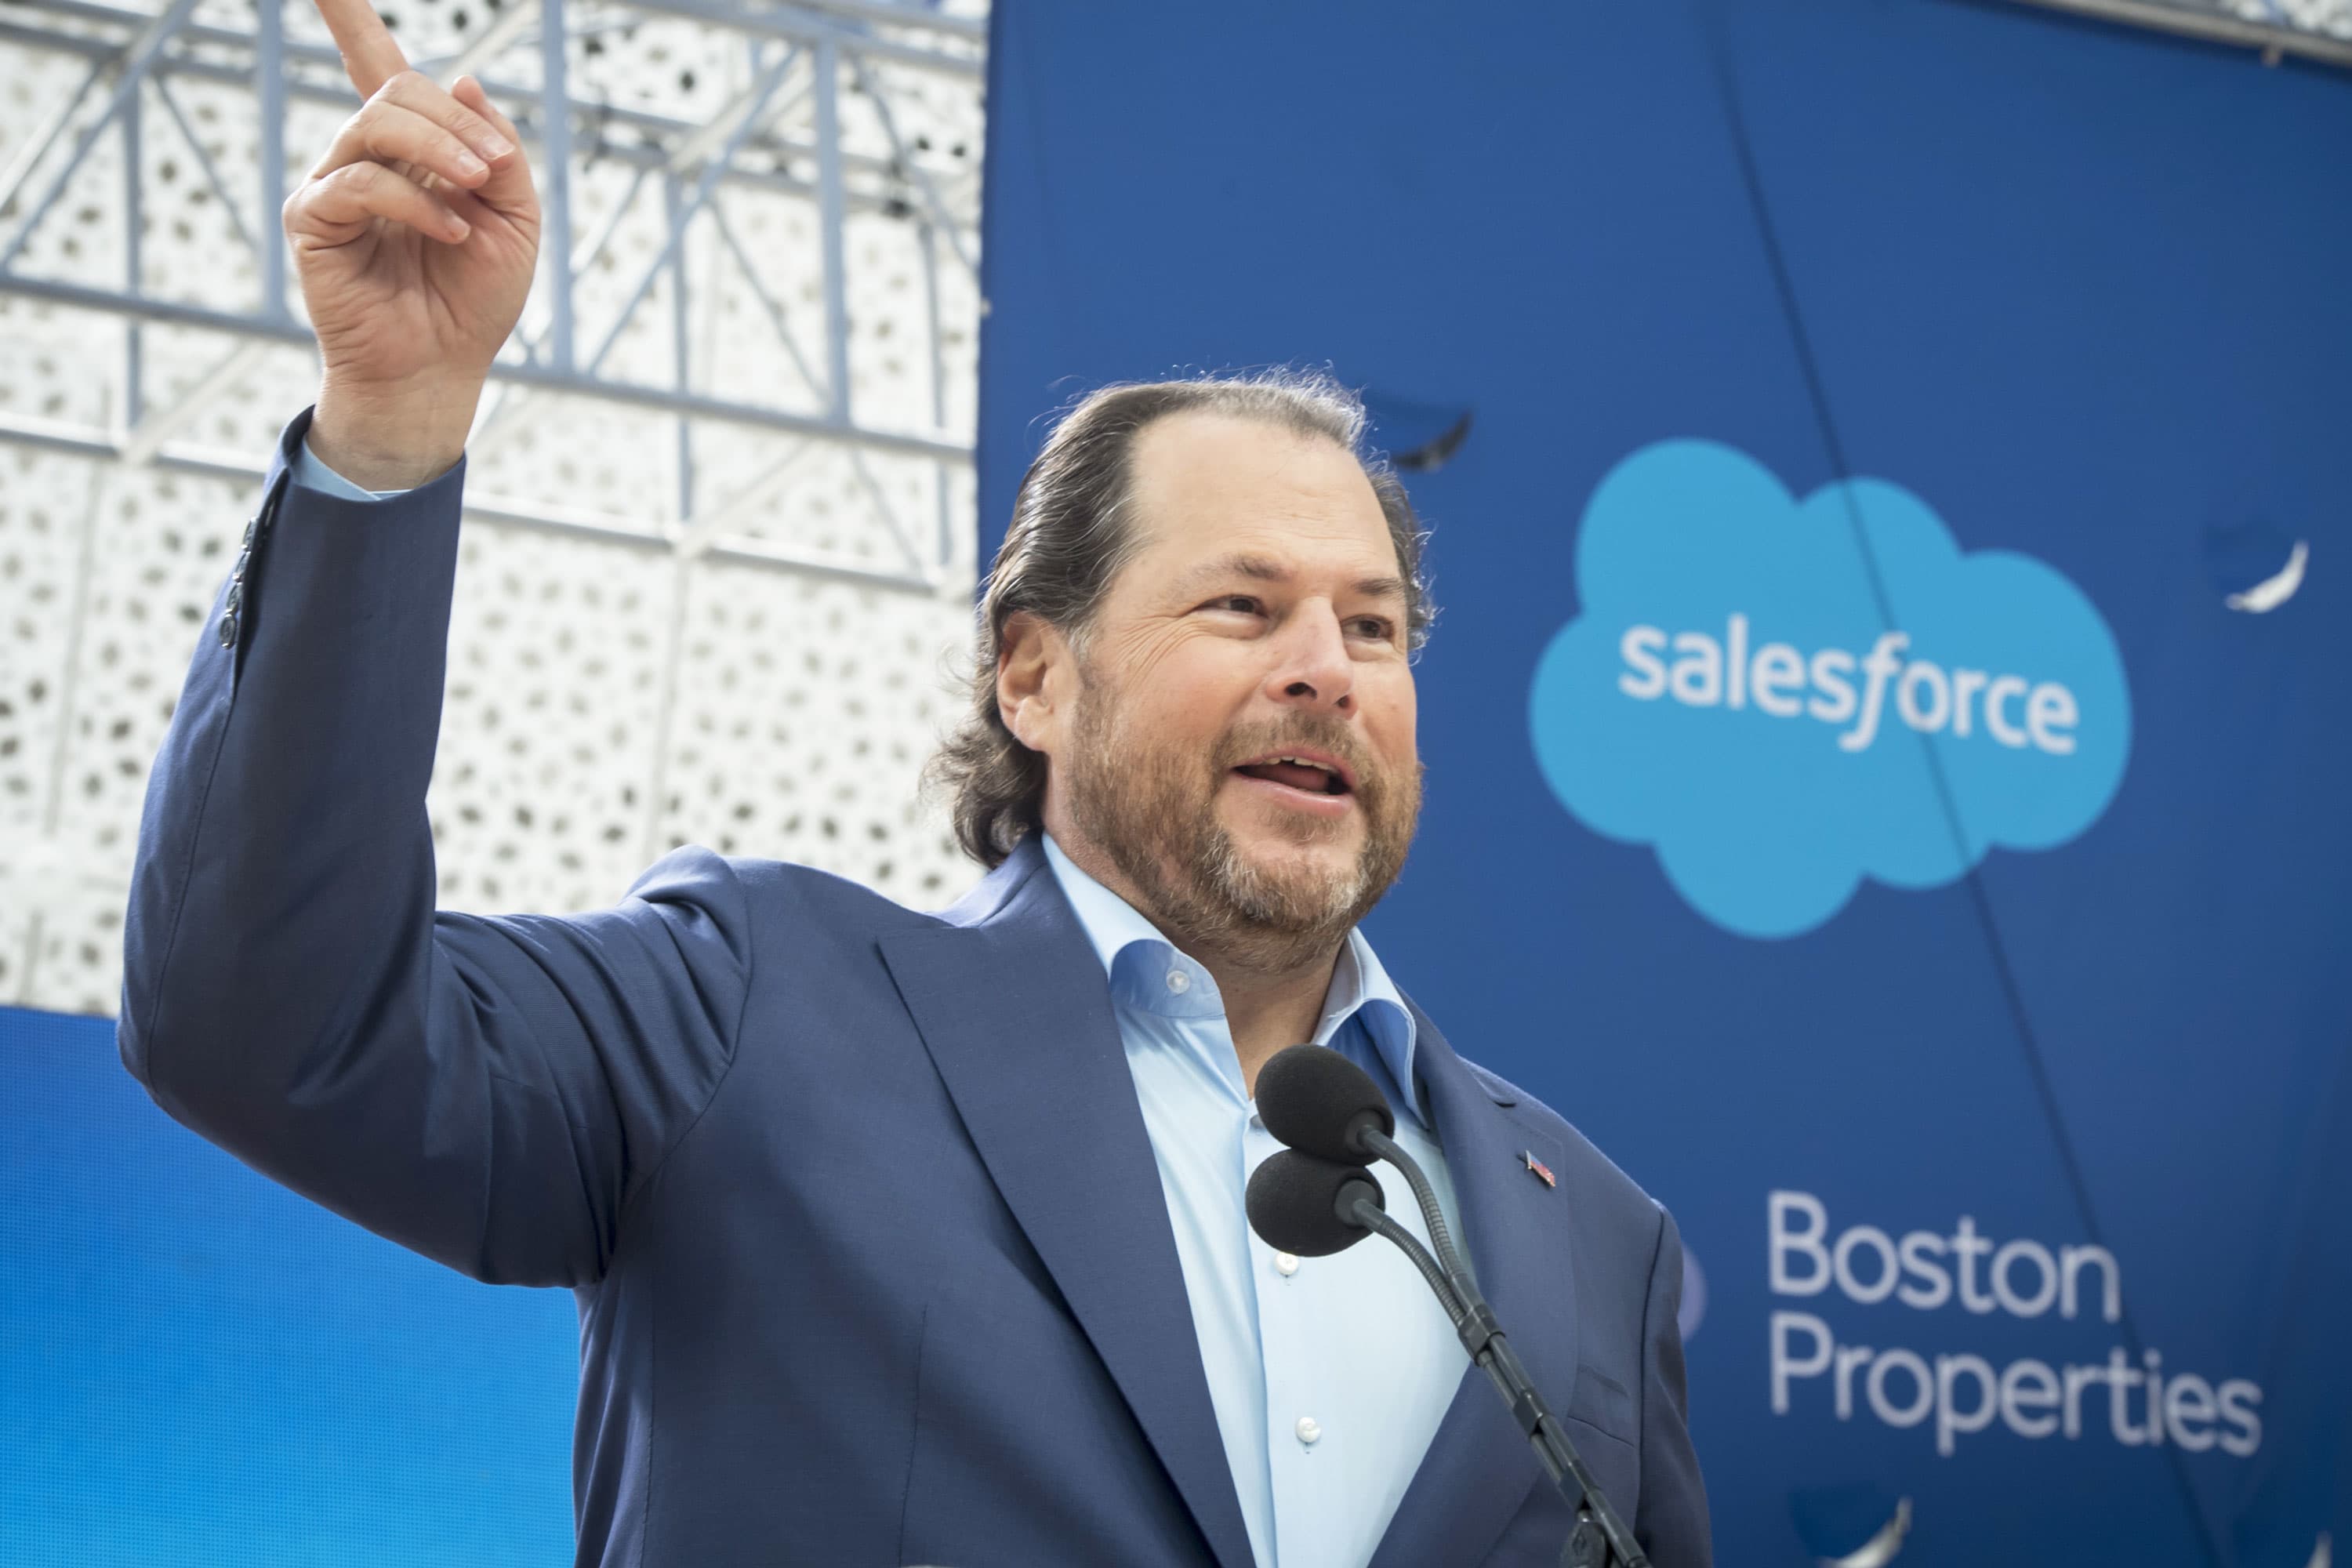 Salesforce expands Work.com applications to manage vaccine distribution programs - CNBC